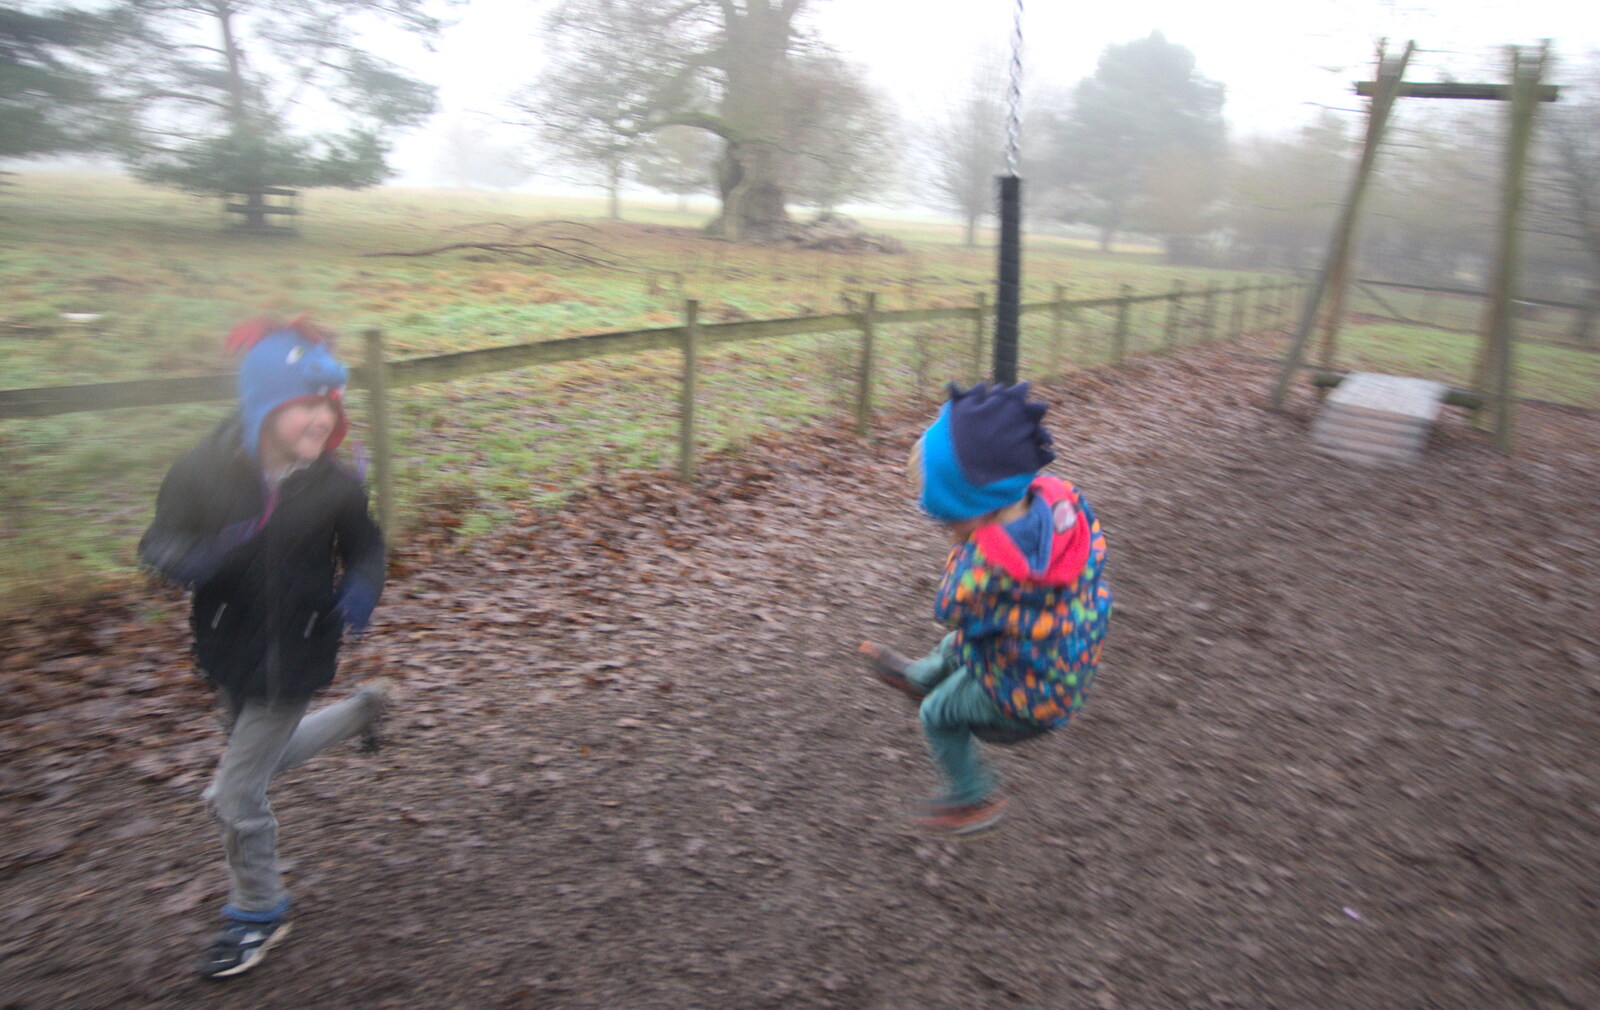 The boys play on a zipwire from A Trip to Ickworth House, Horringer, Suffolk - 30th December 2016